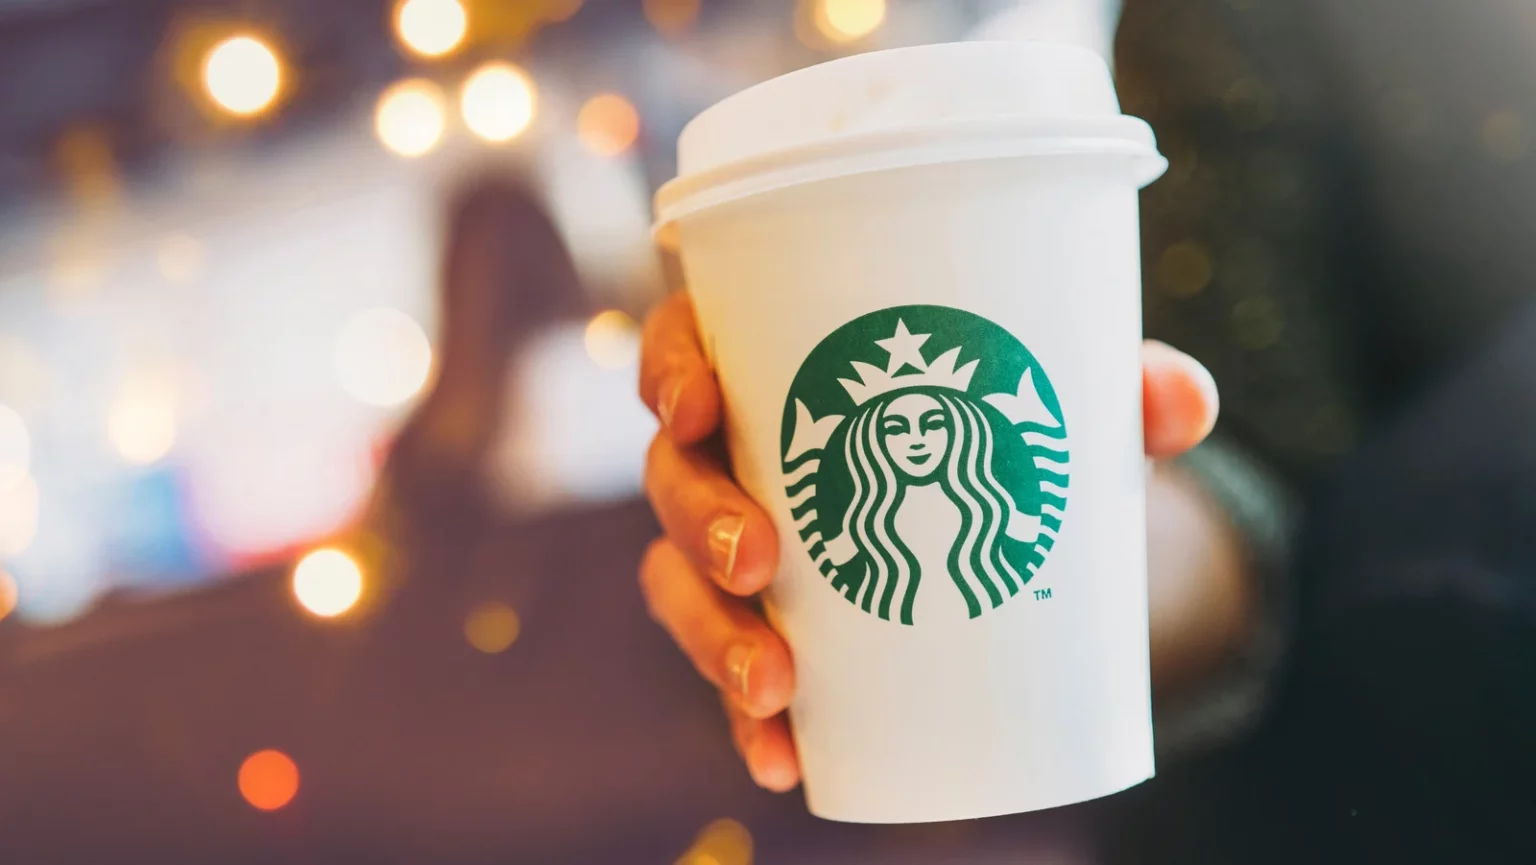 starbucks-launches-olive-oil-coffee-drinks-in-italy